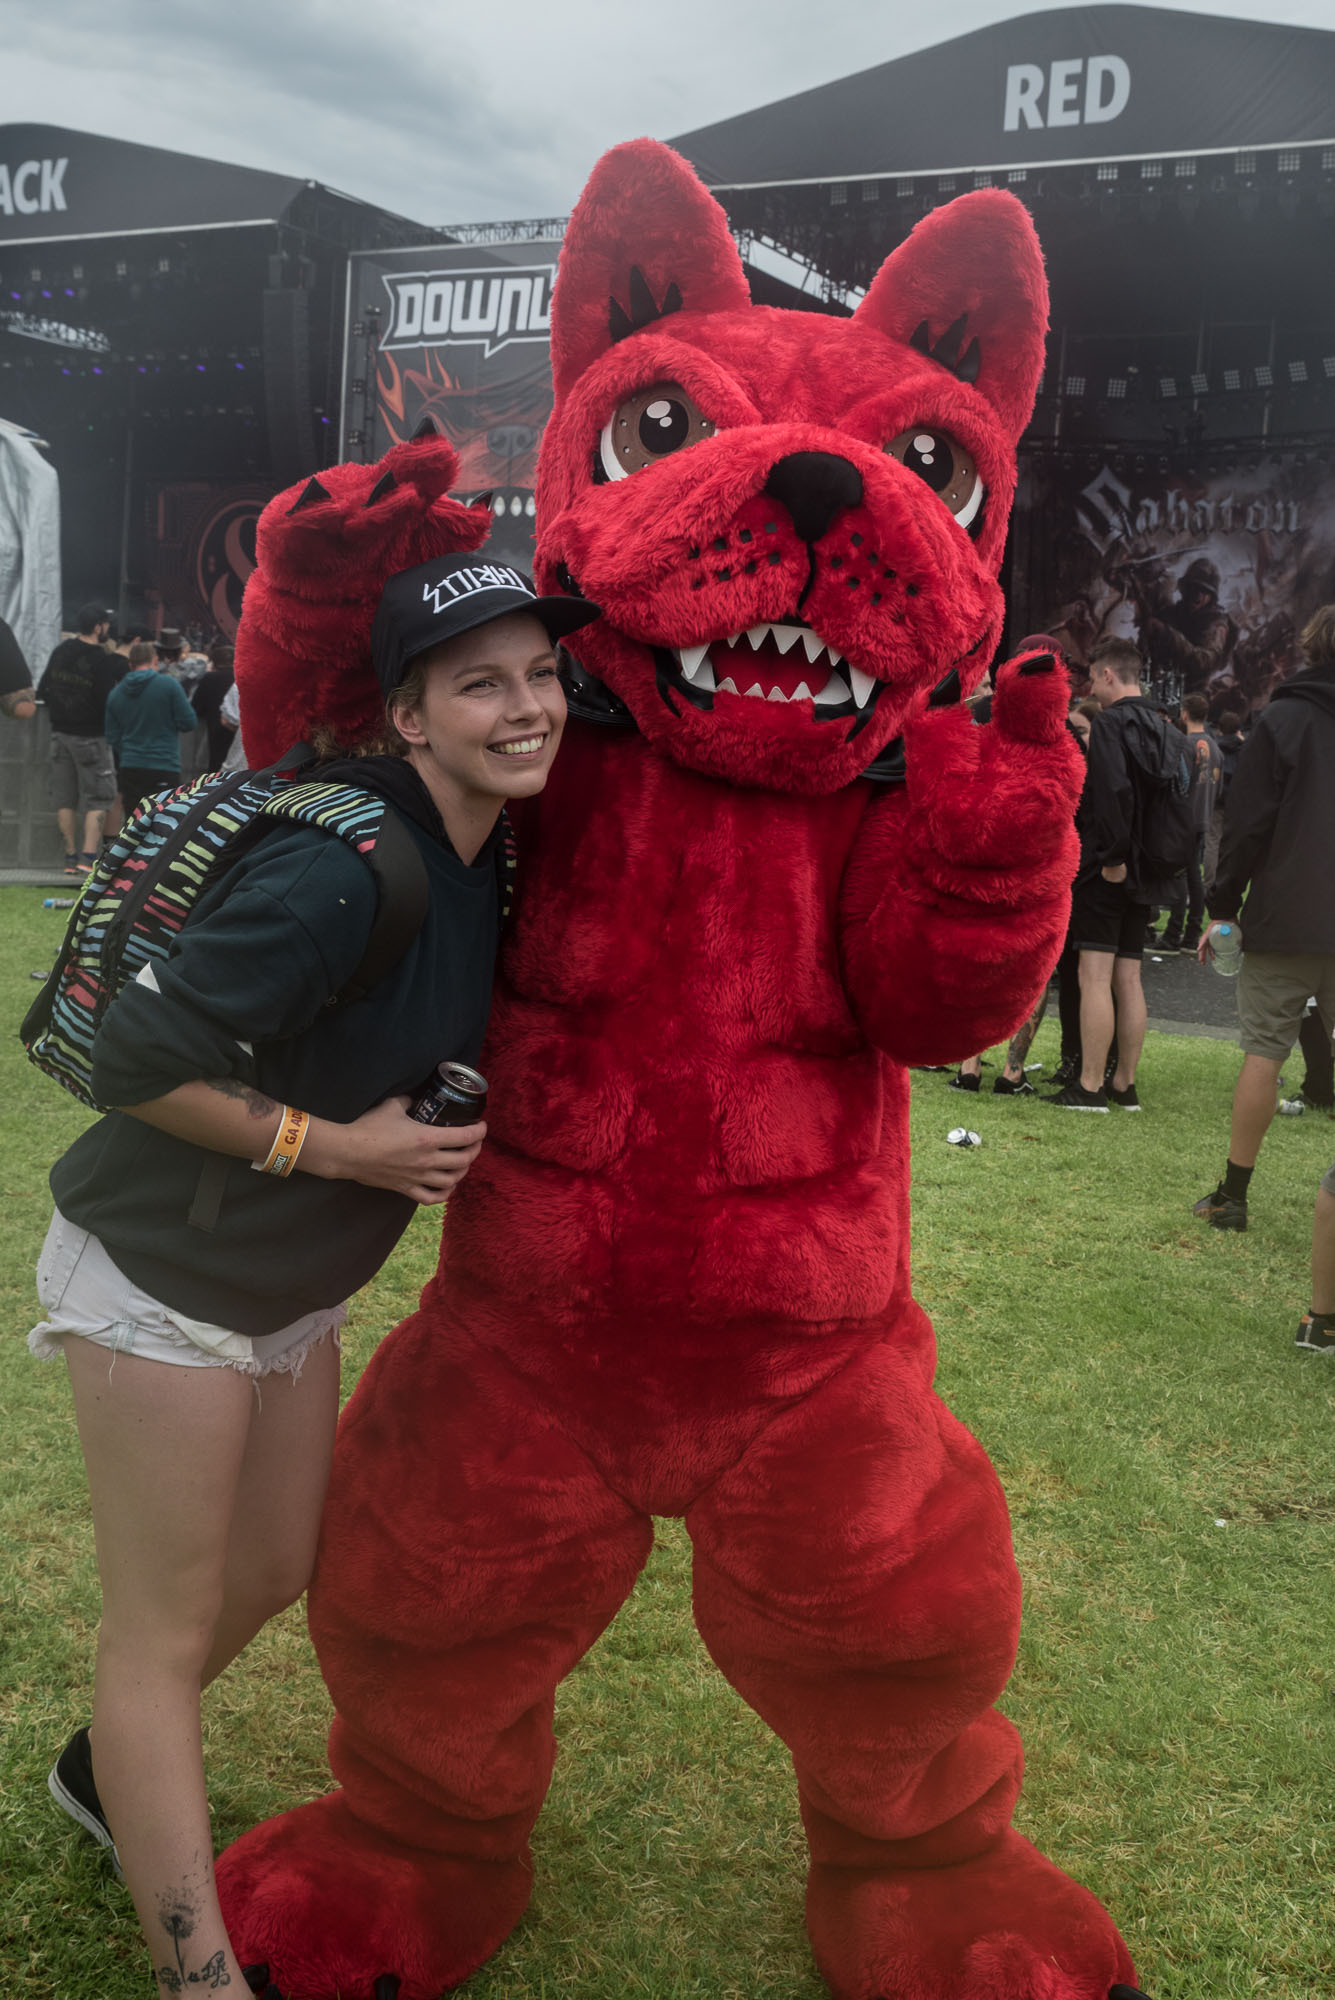 Download Festival Melbourne 2018 - Paul Tadday Photography - 015.jpg